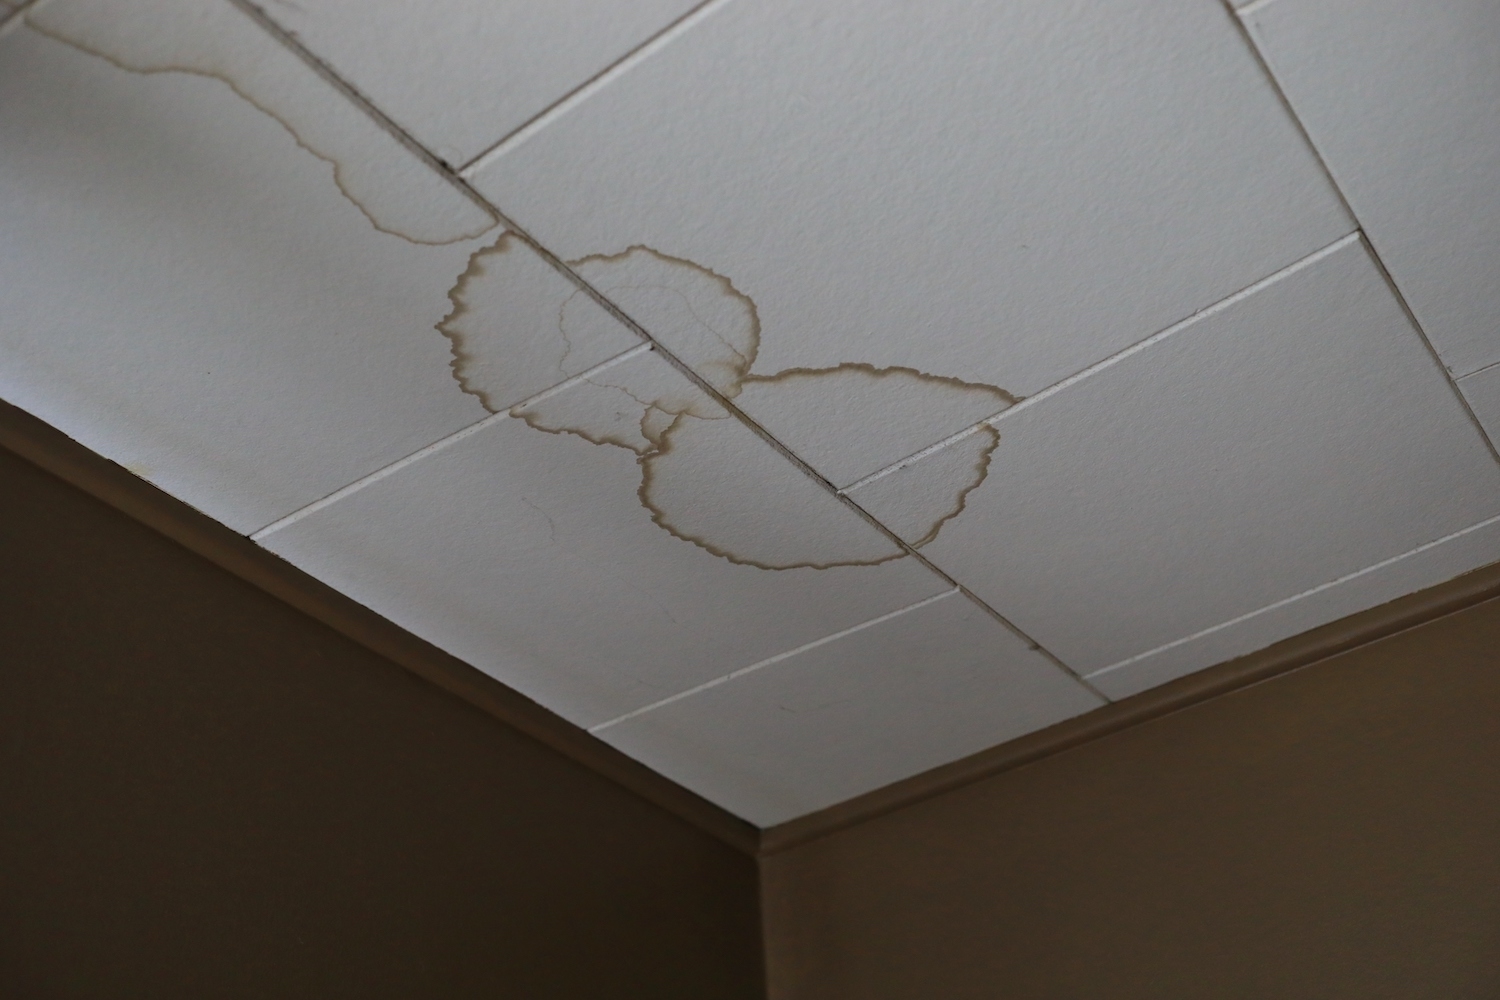 Water leaks from a ceiling